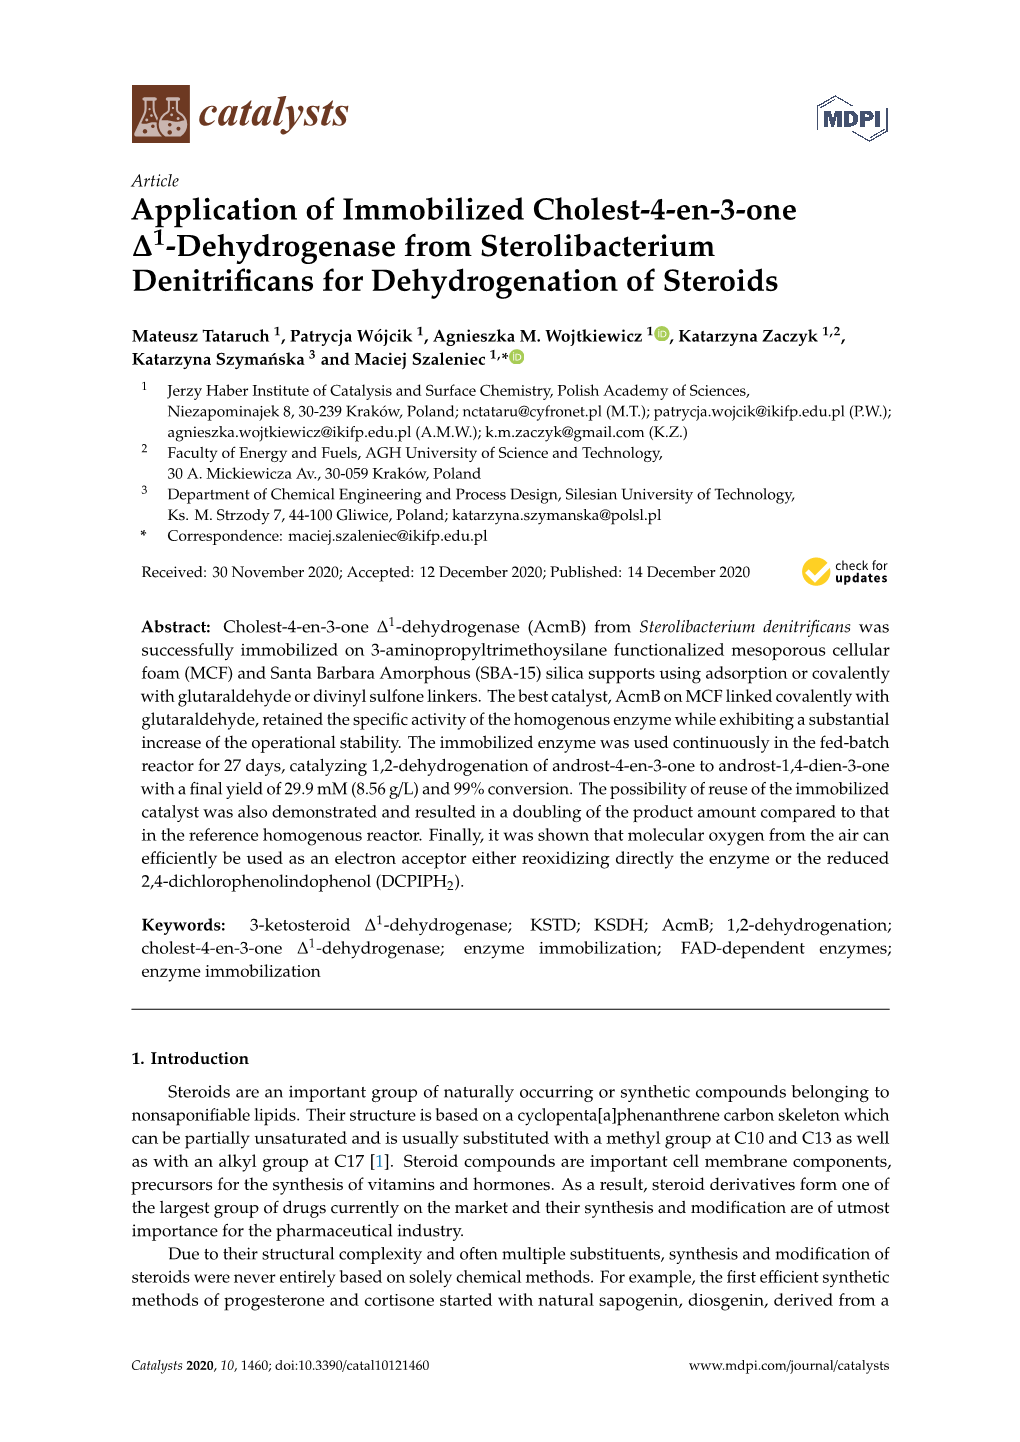 Application of Immobilized Cholest-4-En-3-One 1-Dehydrogenase from Sterolibacterium Denitrificans for Dehydrogenation of Steroid